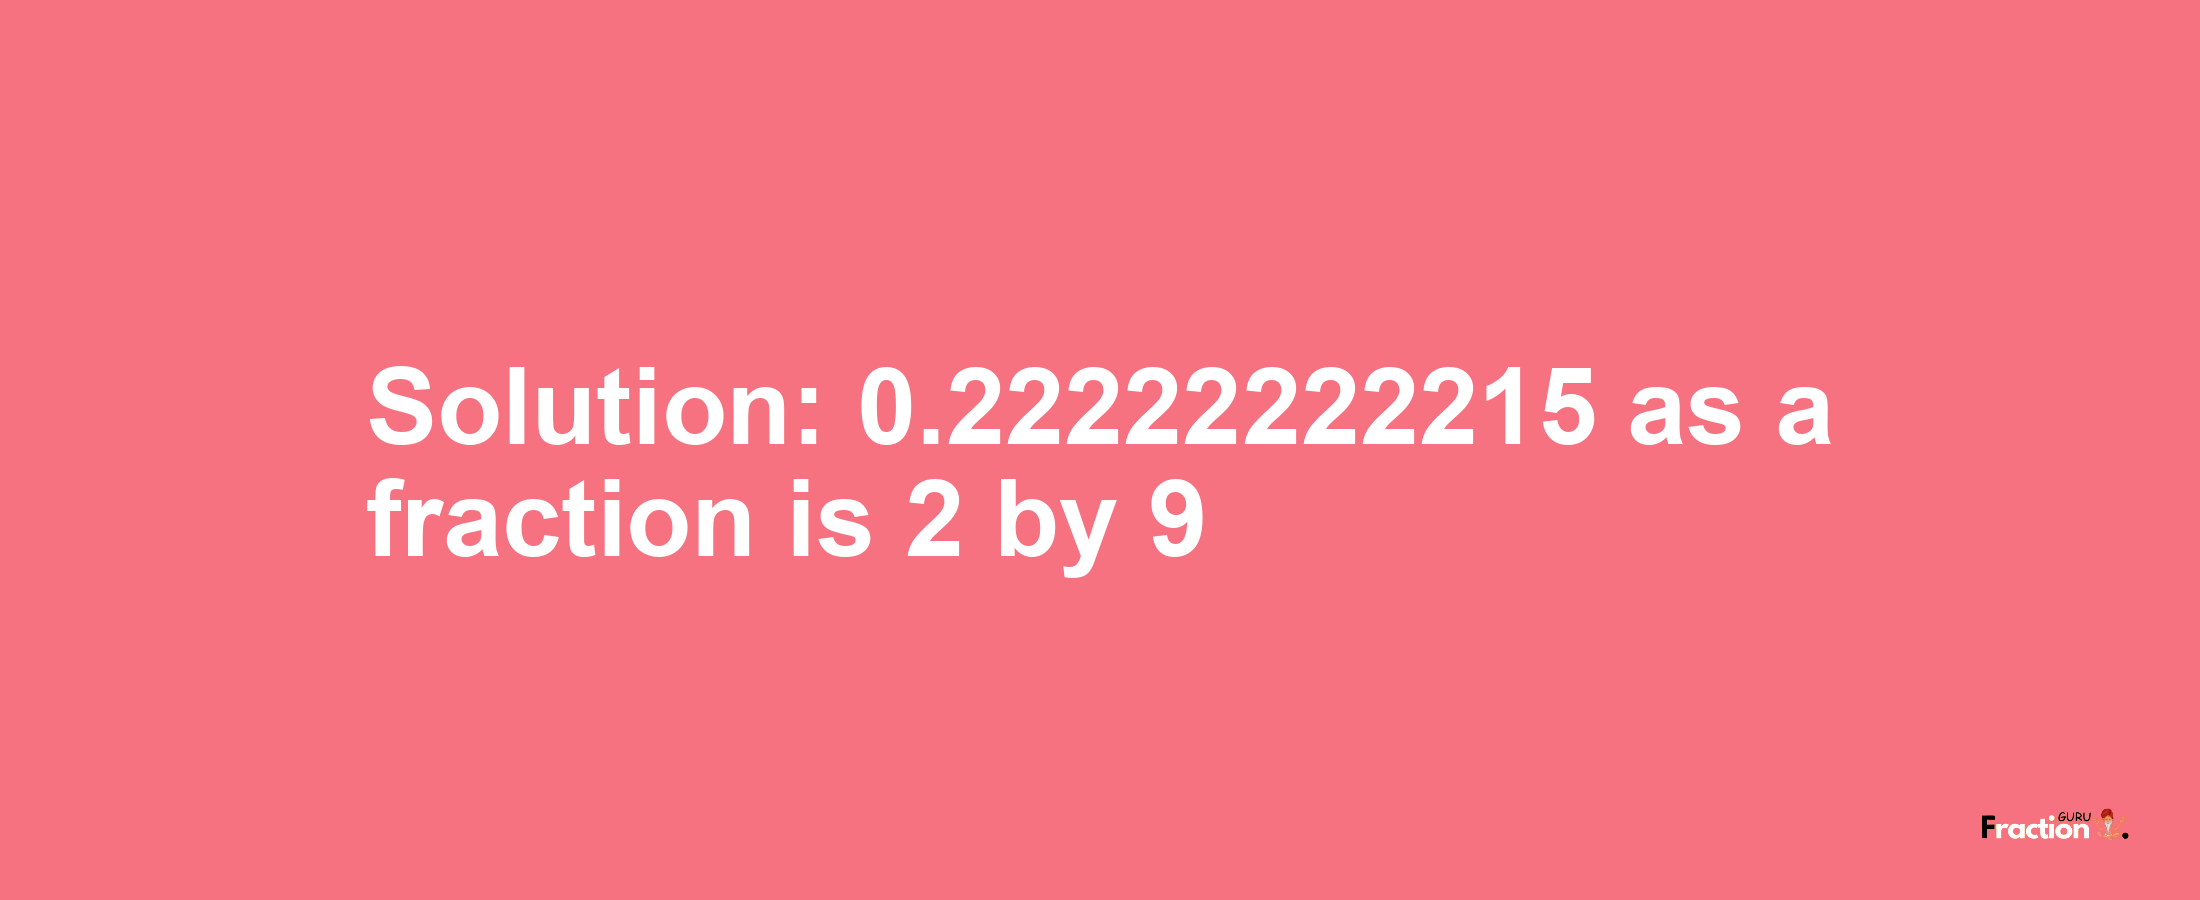 Solution:0.22222222215 as a fraction is 2/9